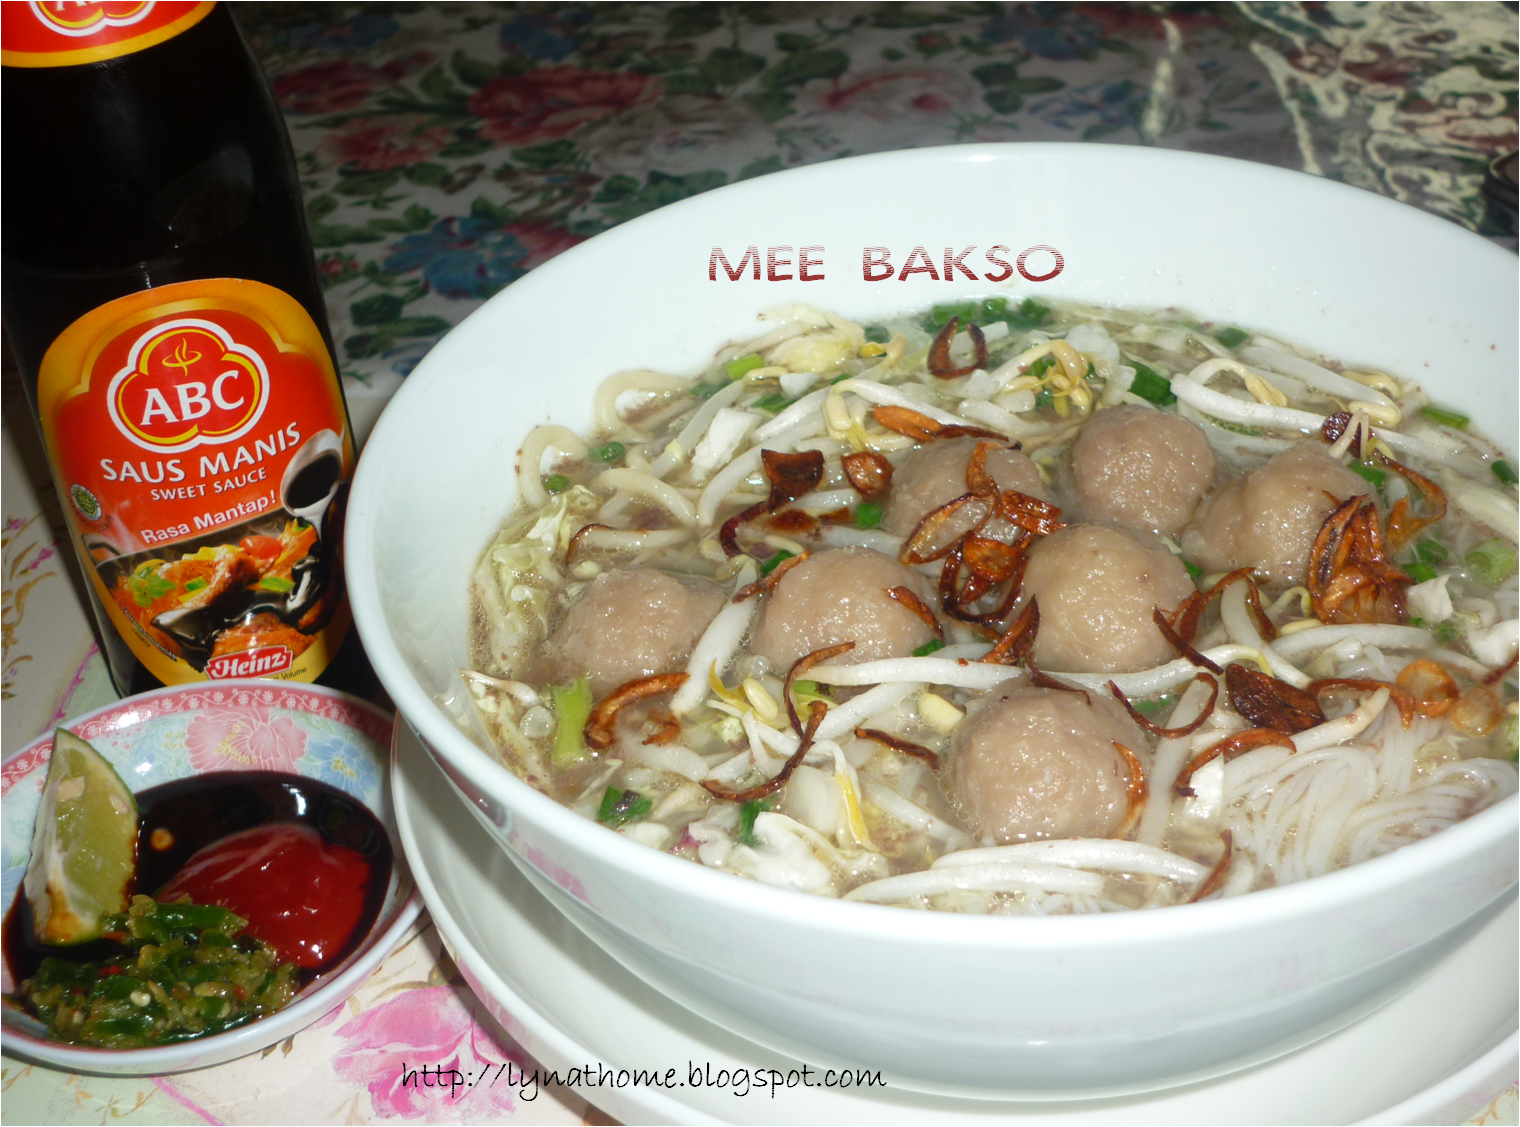 lyn at homebakery: ~: Bakso@ Indonesian meat ball soup